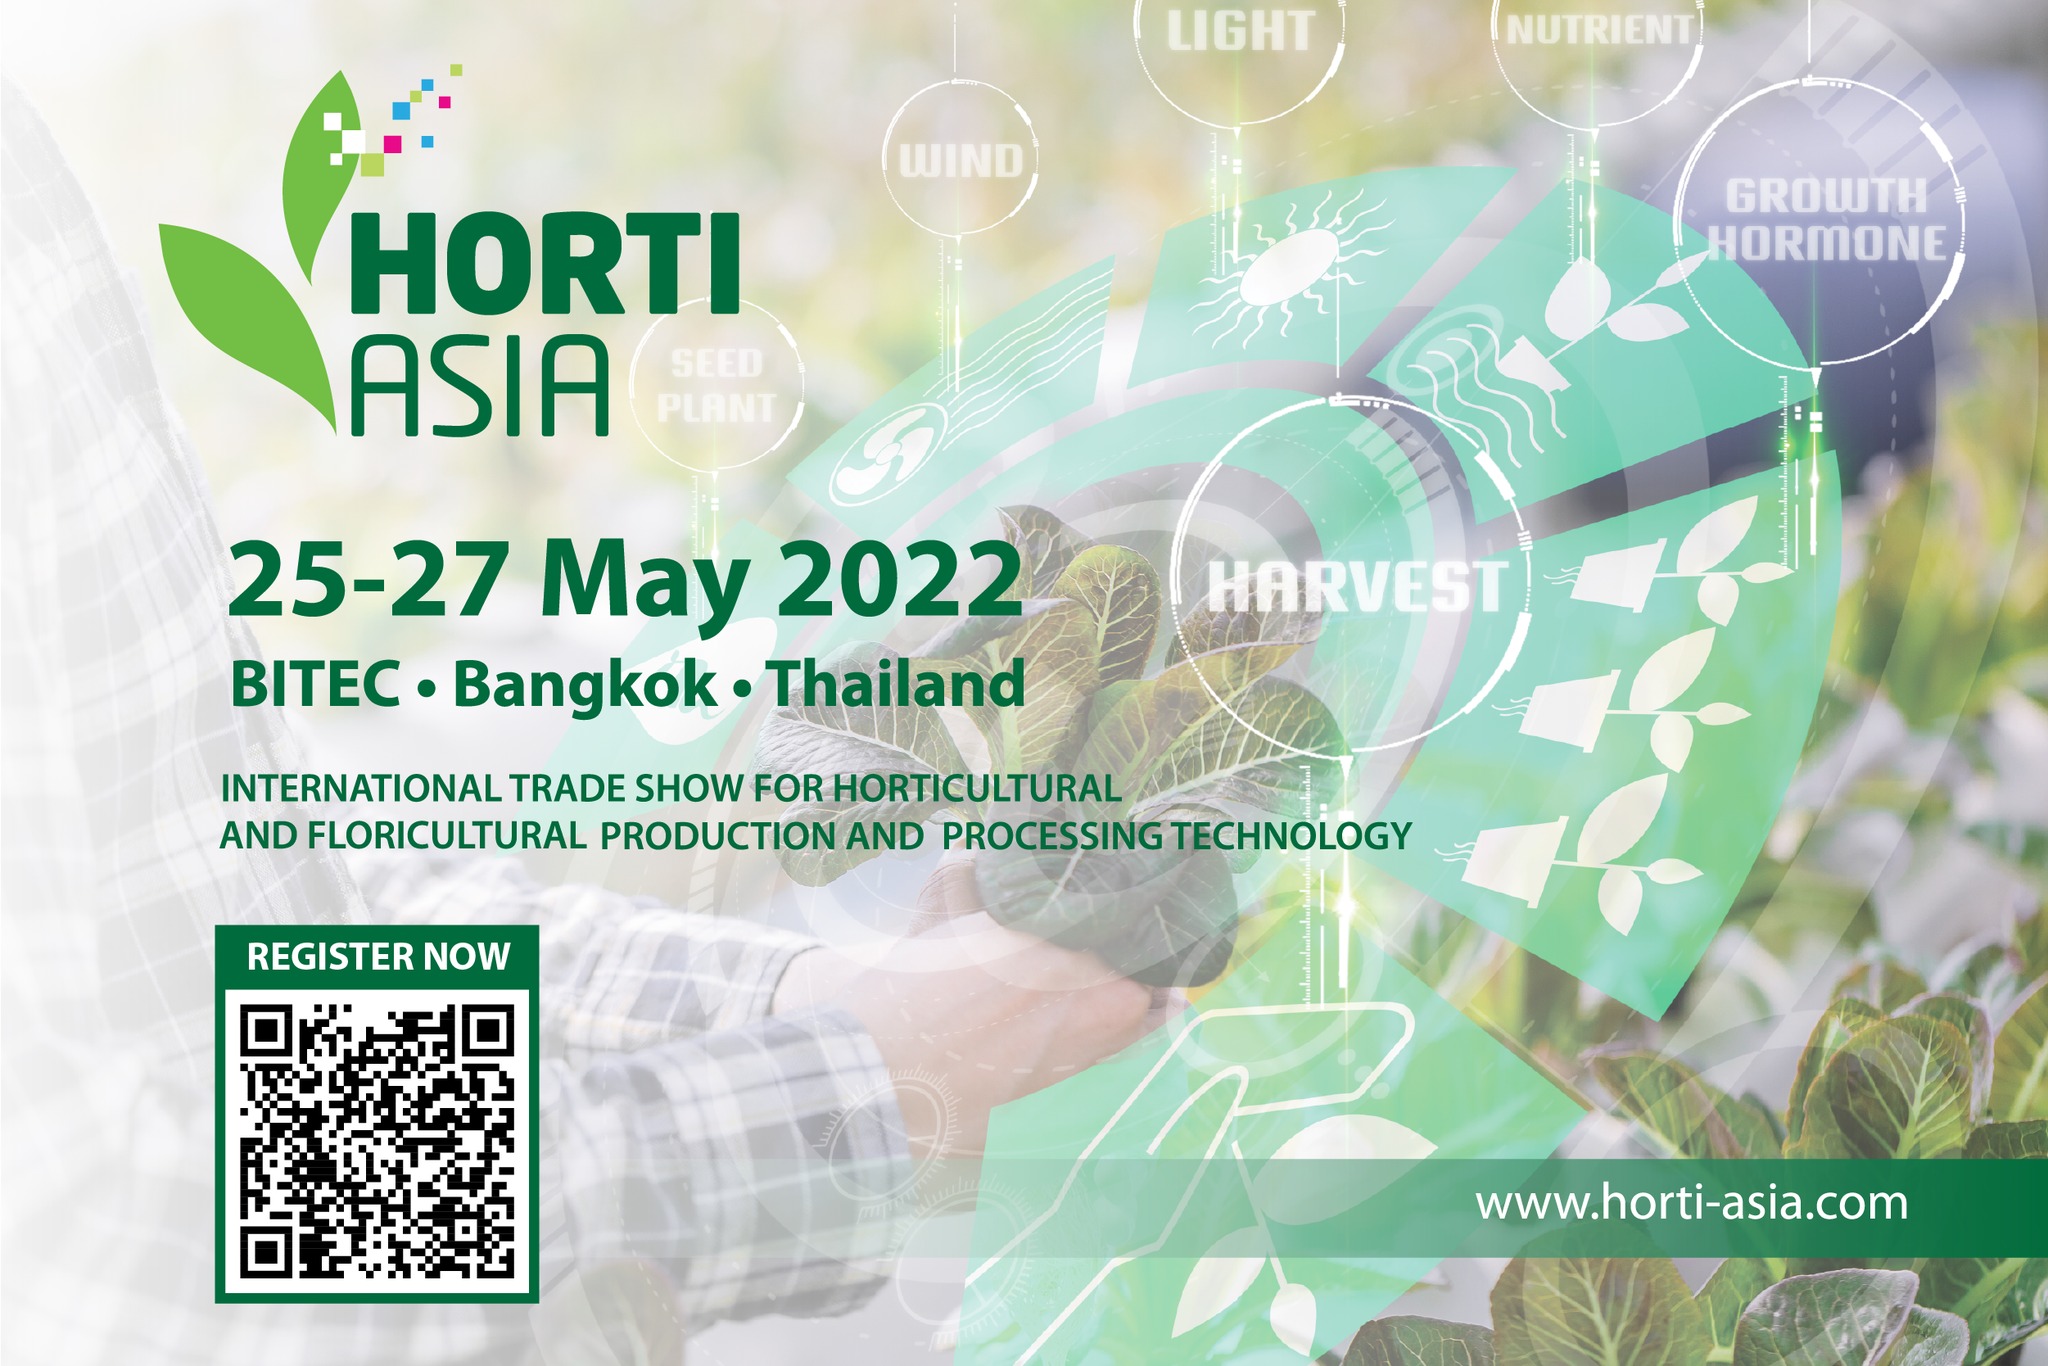 Agritechnica Asia and Horti Asia 2022